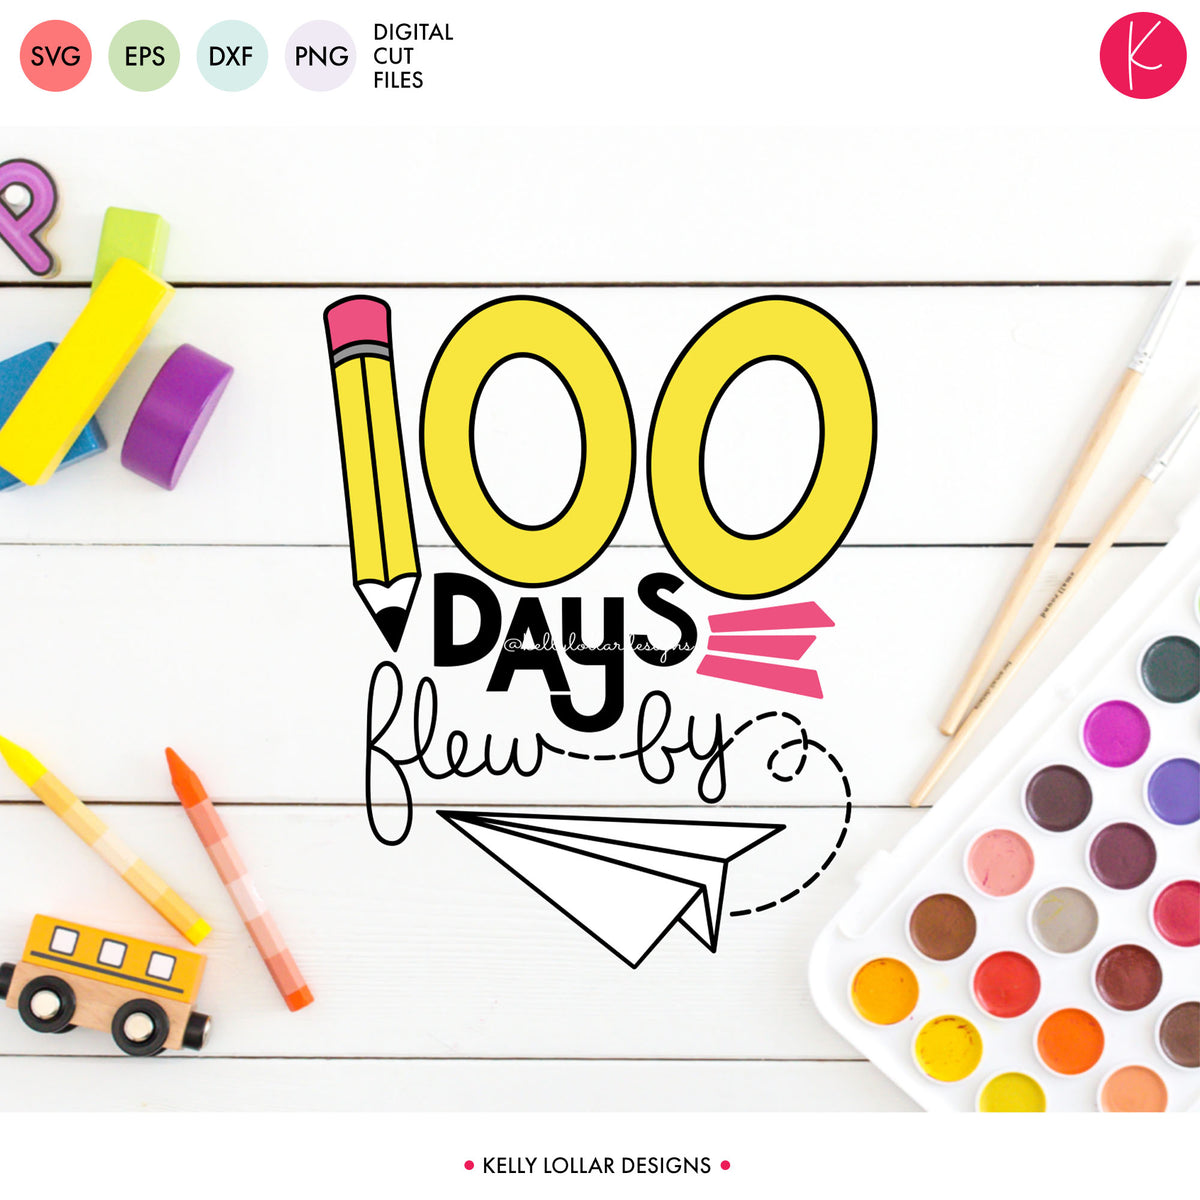 100 Days Flew By | SVG DXF EPS PNG Cut Files